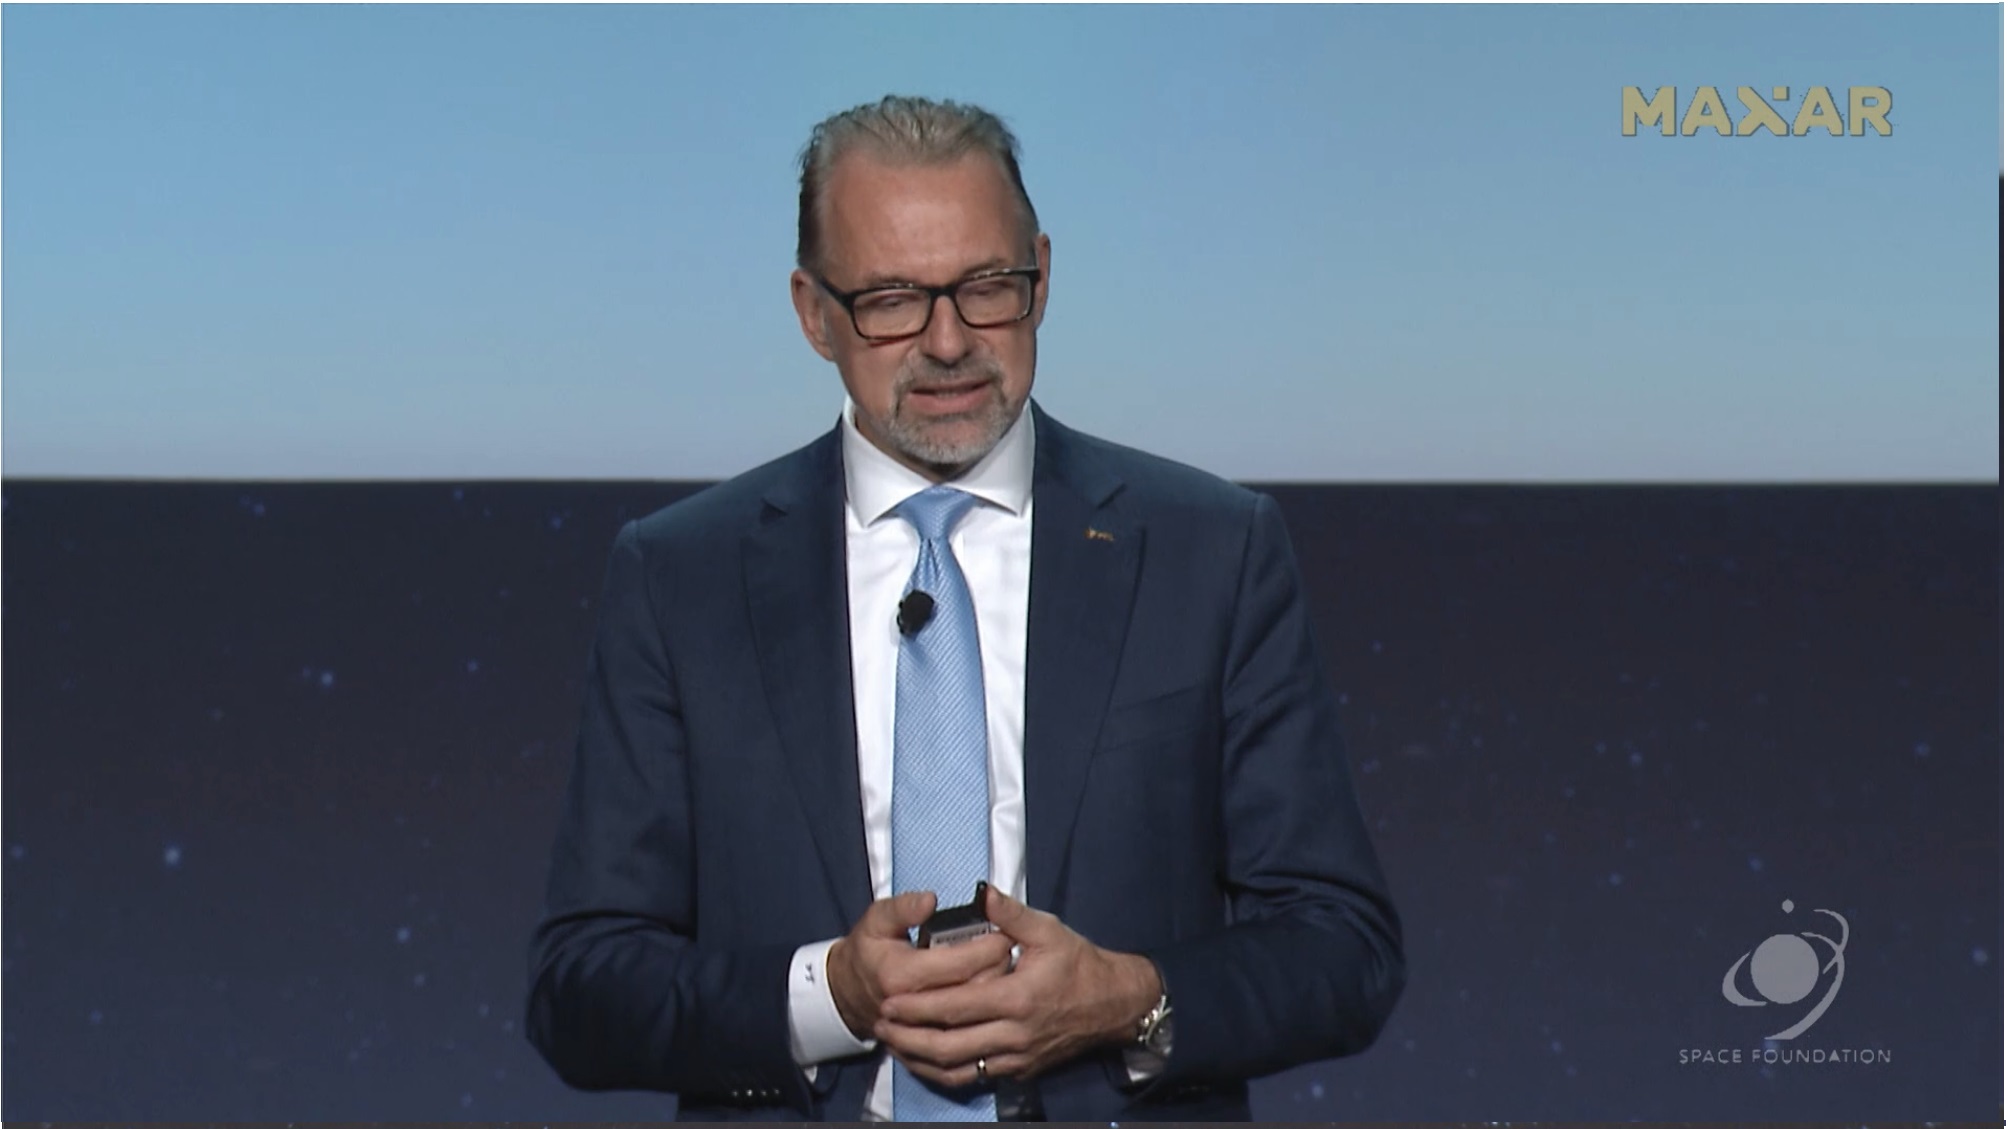 European Space Agency Director General Josef Aschbacher discusses his agency's exploration goals and plans for international partnerships to enhance efforts including NASA's Artemis Program.